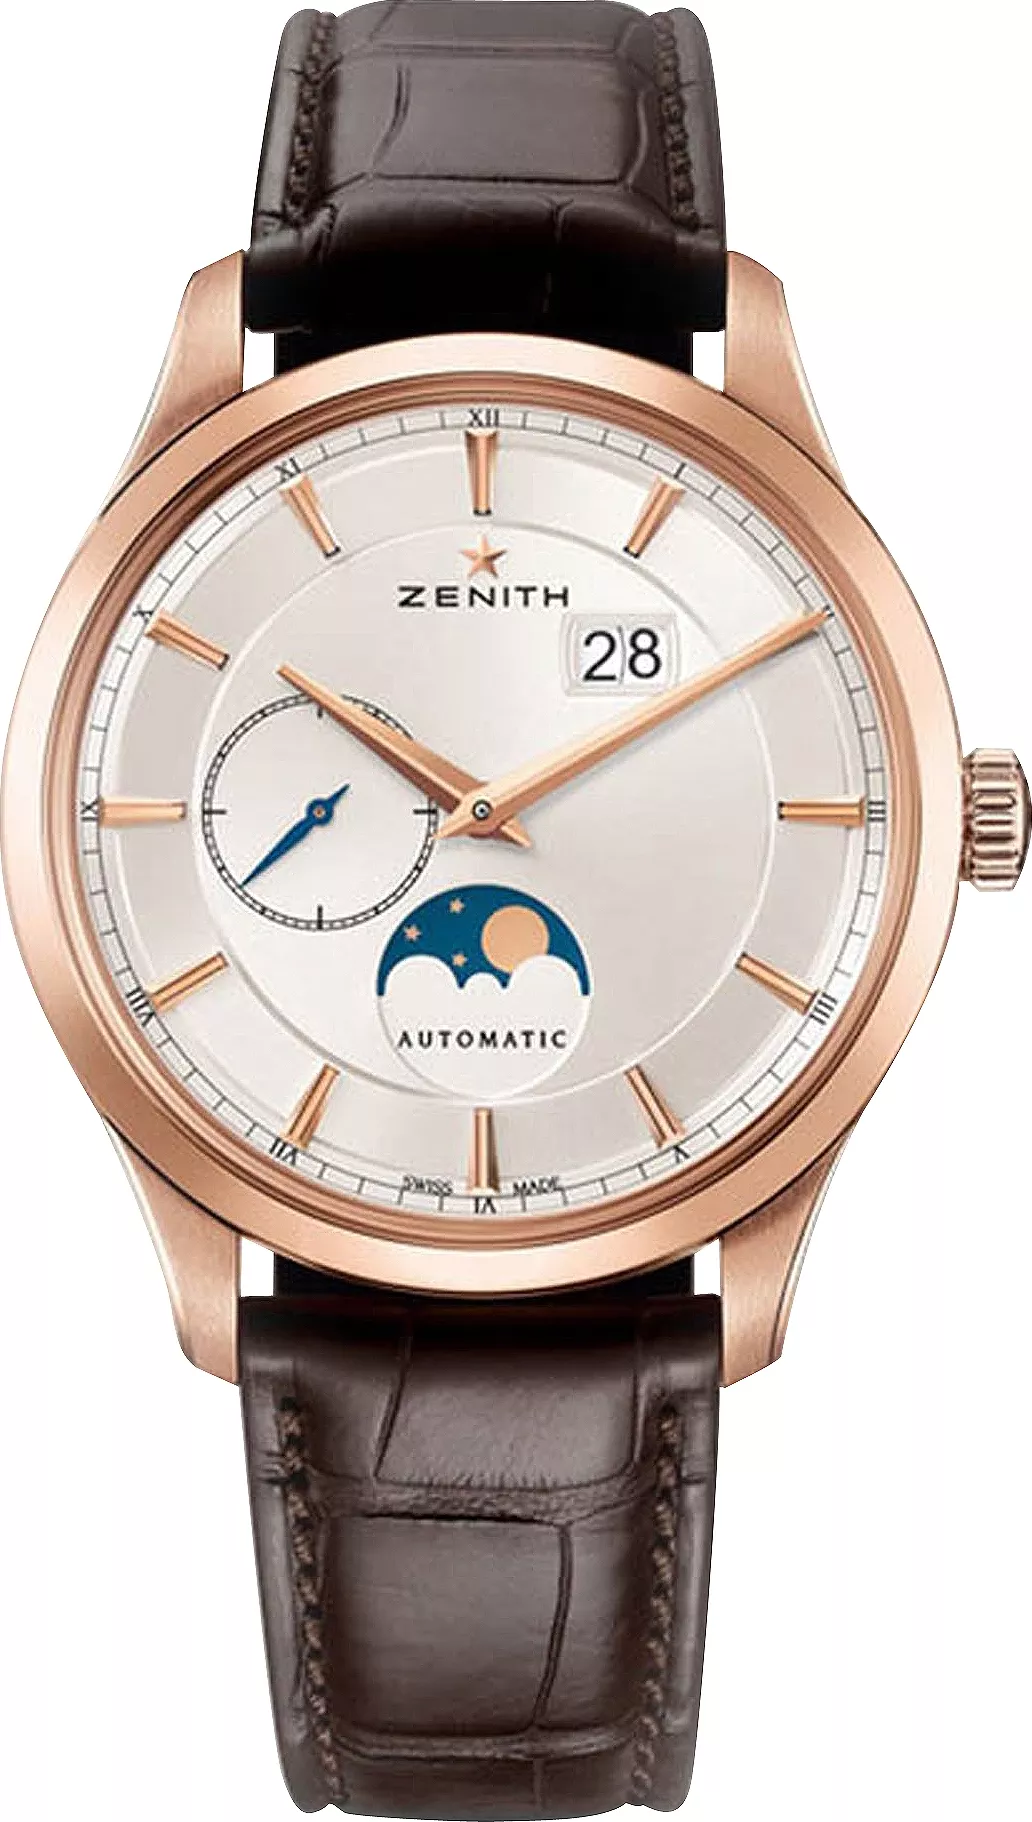  ZENITH Captain Moonphase 18kt Rose Gold Watch 40mm 